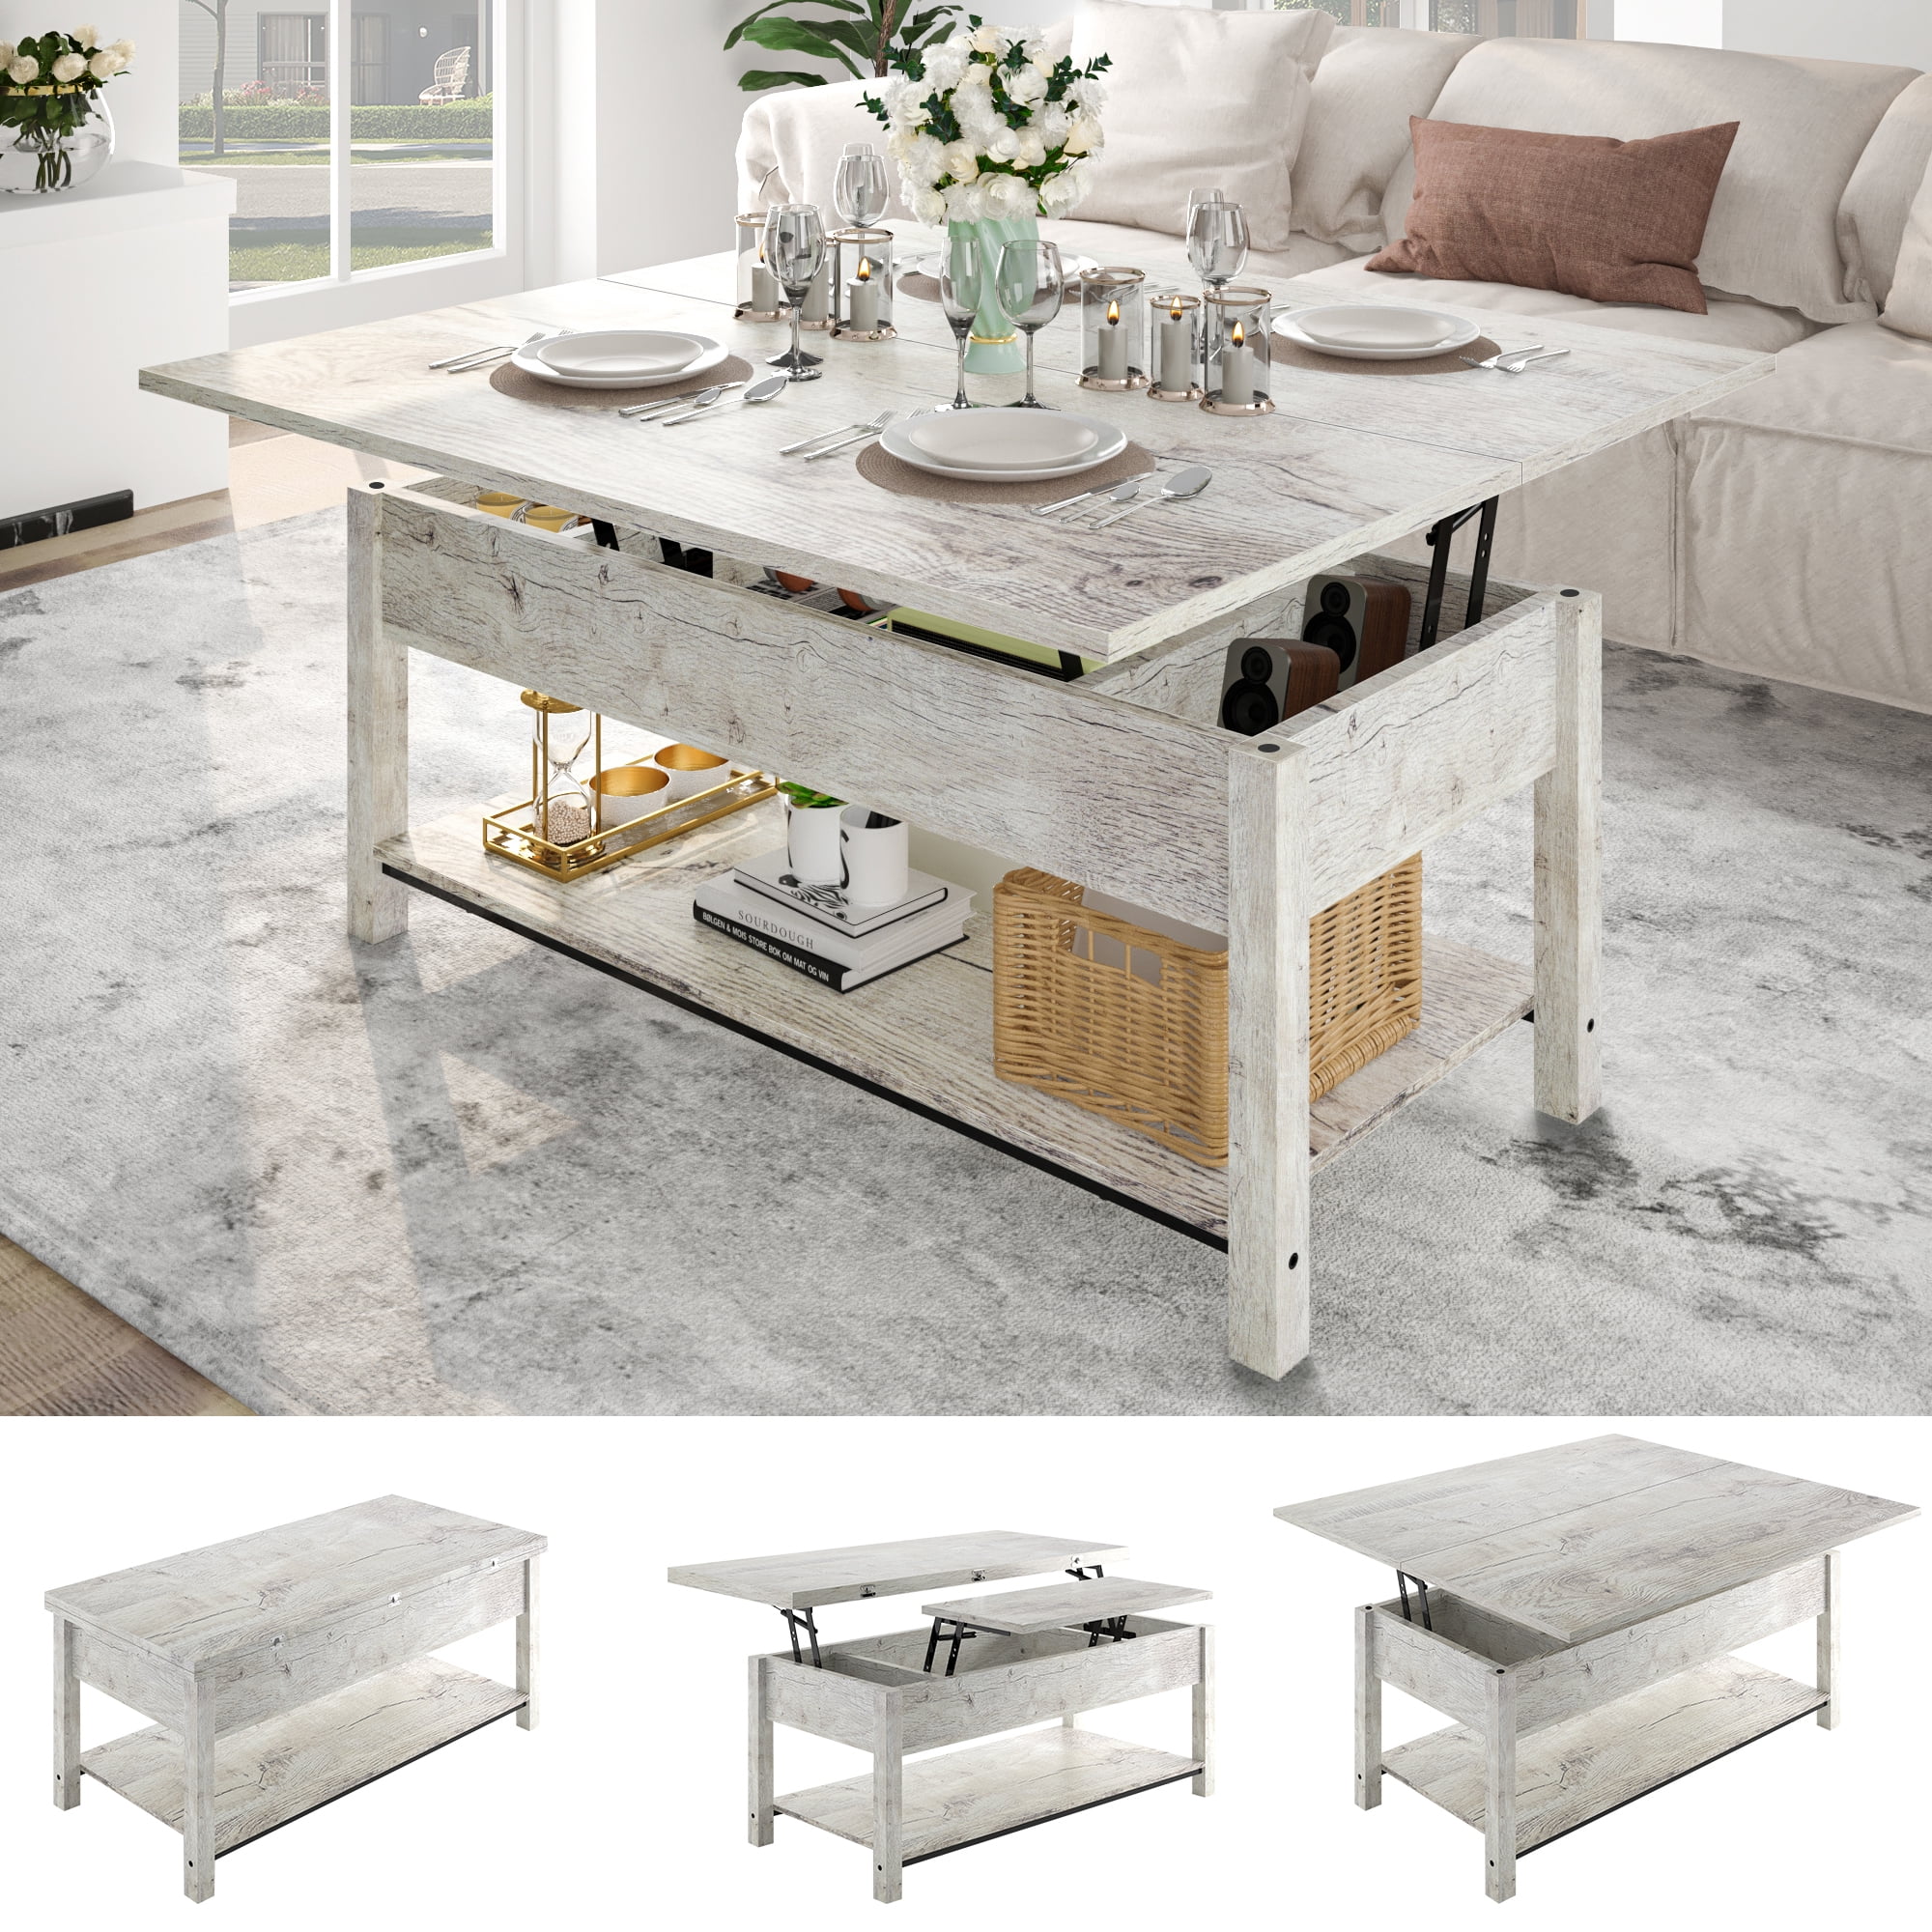 GUNAITO 41.73"Lift Top Coffee Table 4 in 1 Multi-Function Convertible Coffee Table with Storage Modern Coffee Table Converts to Dining Table for Living Room Grey - image 1 of 8